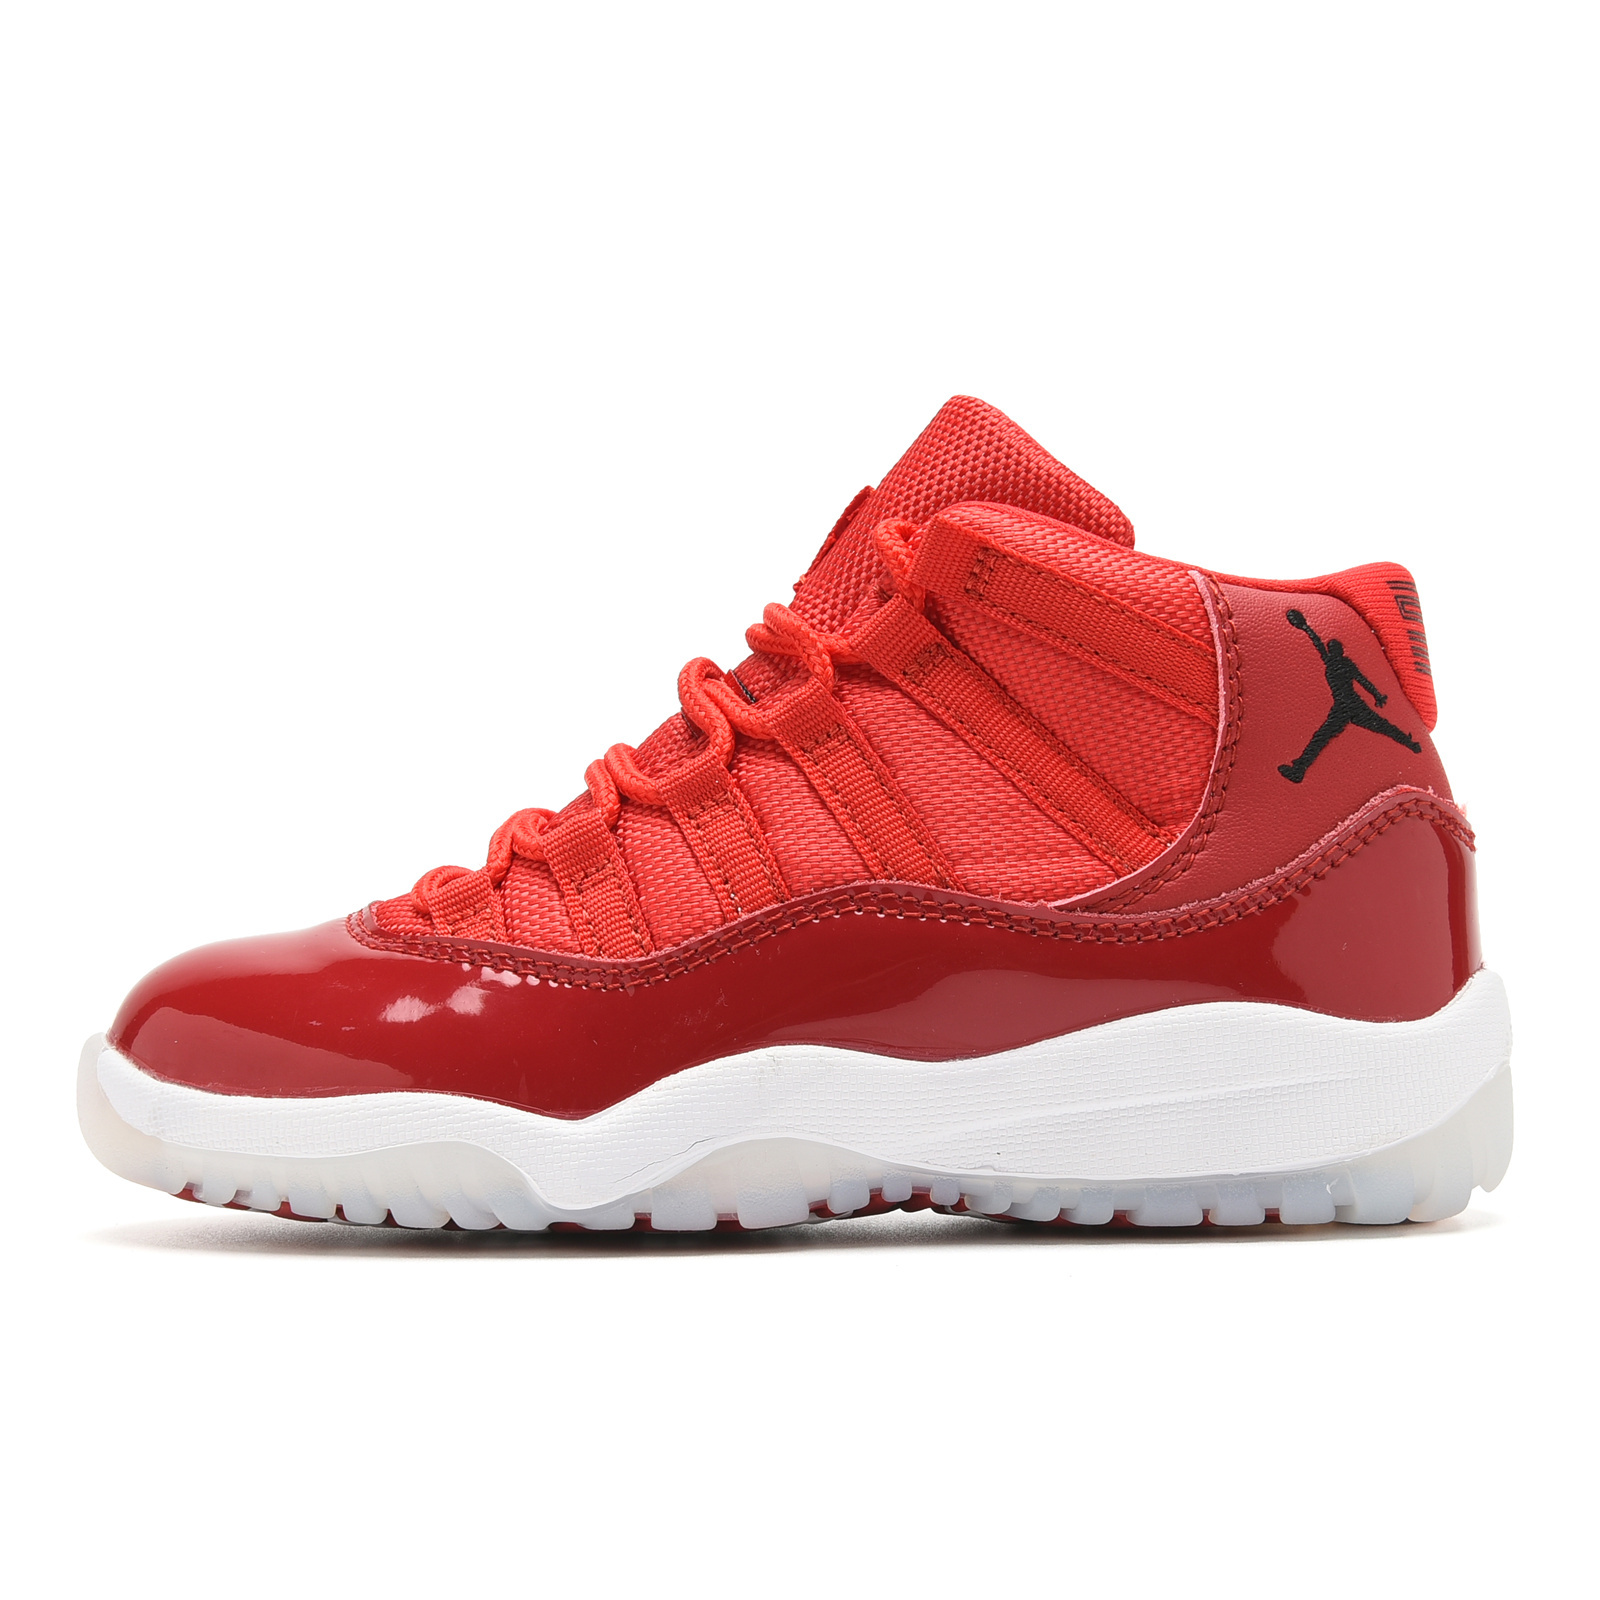 Youth Running Weapon Air Jordan 11 Red Shoes 037